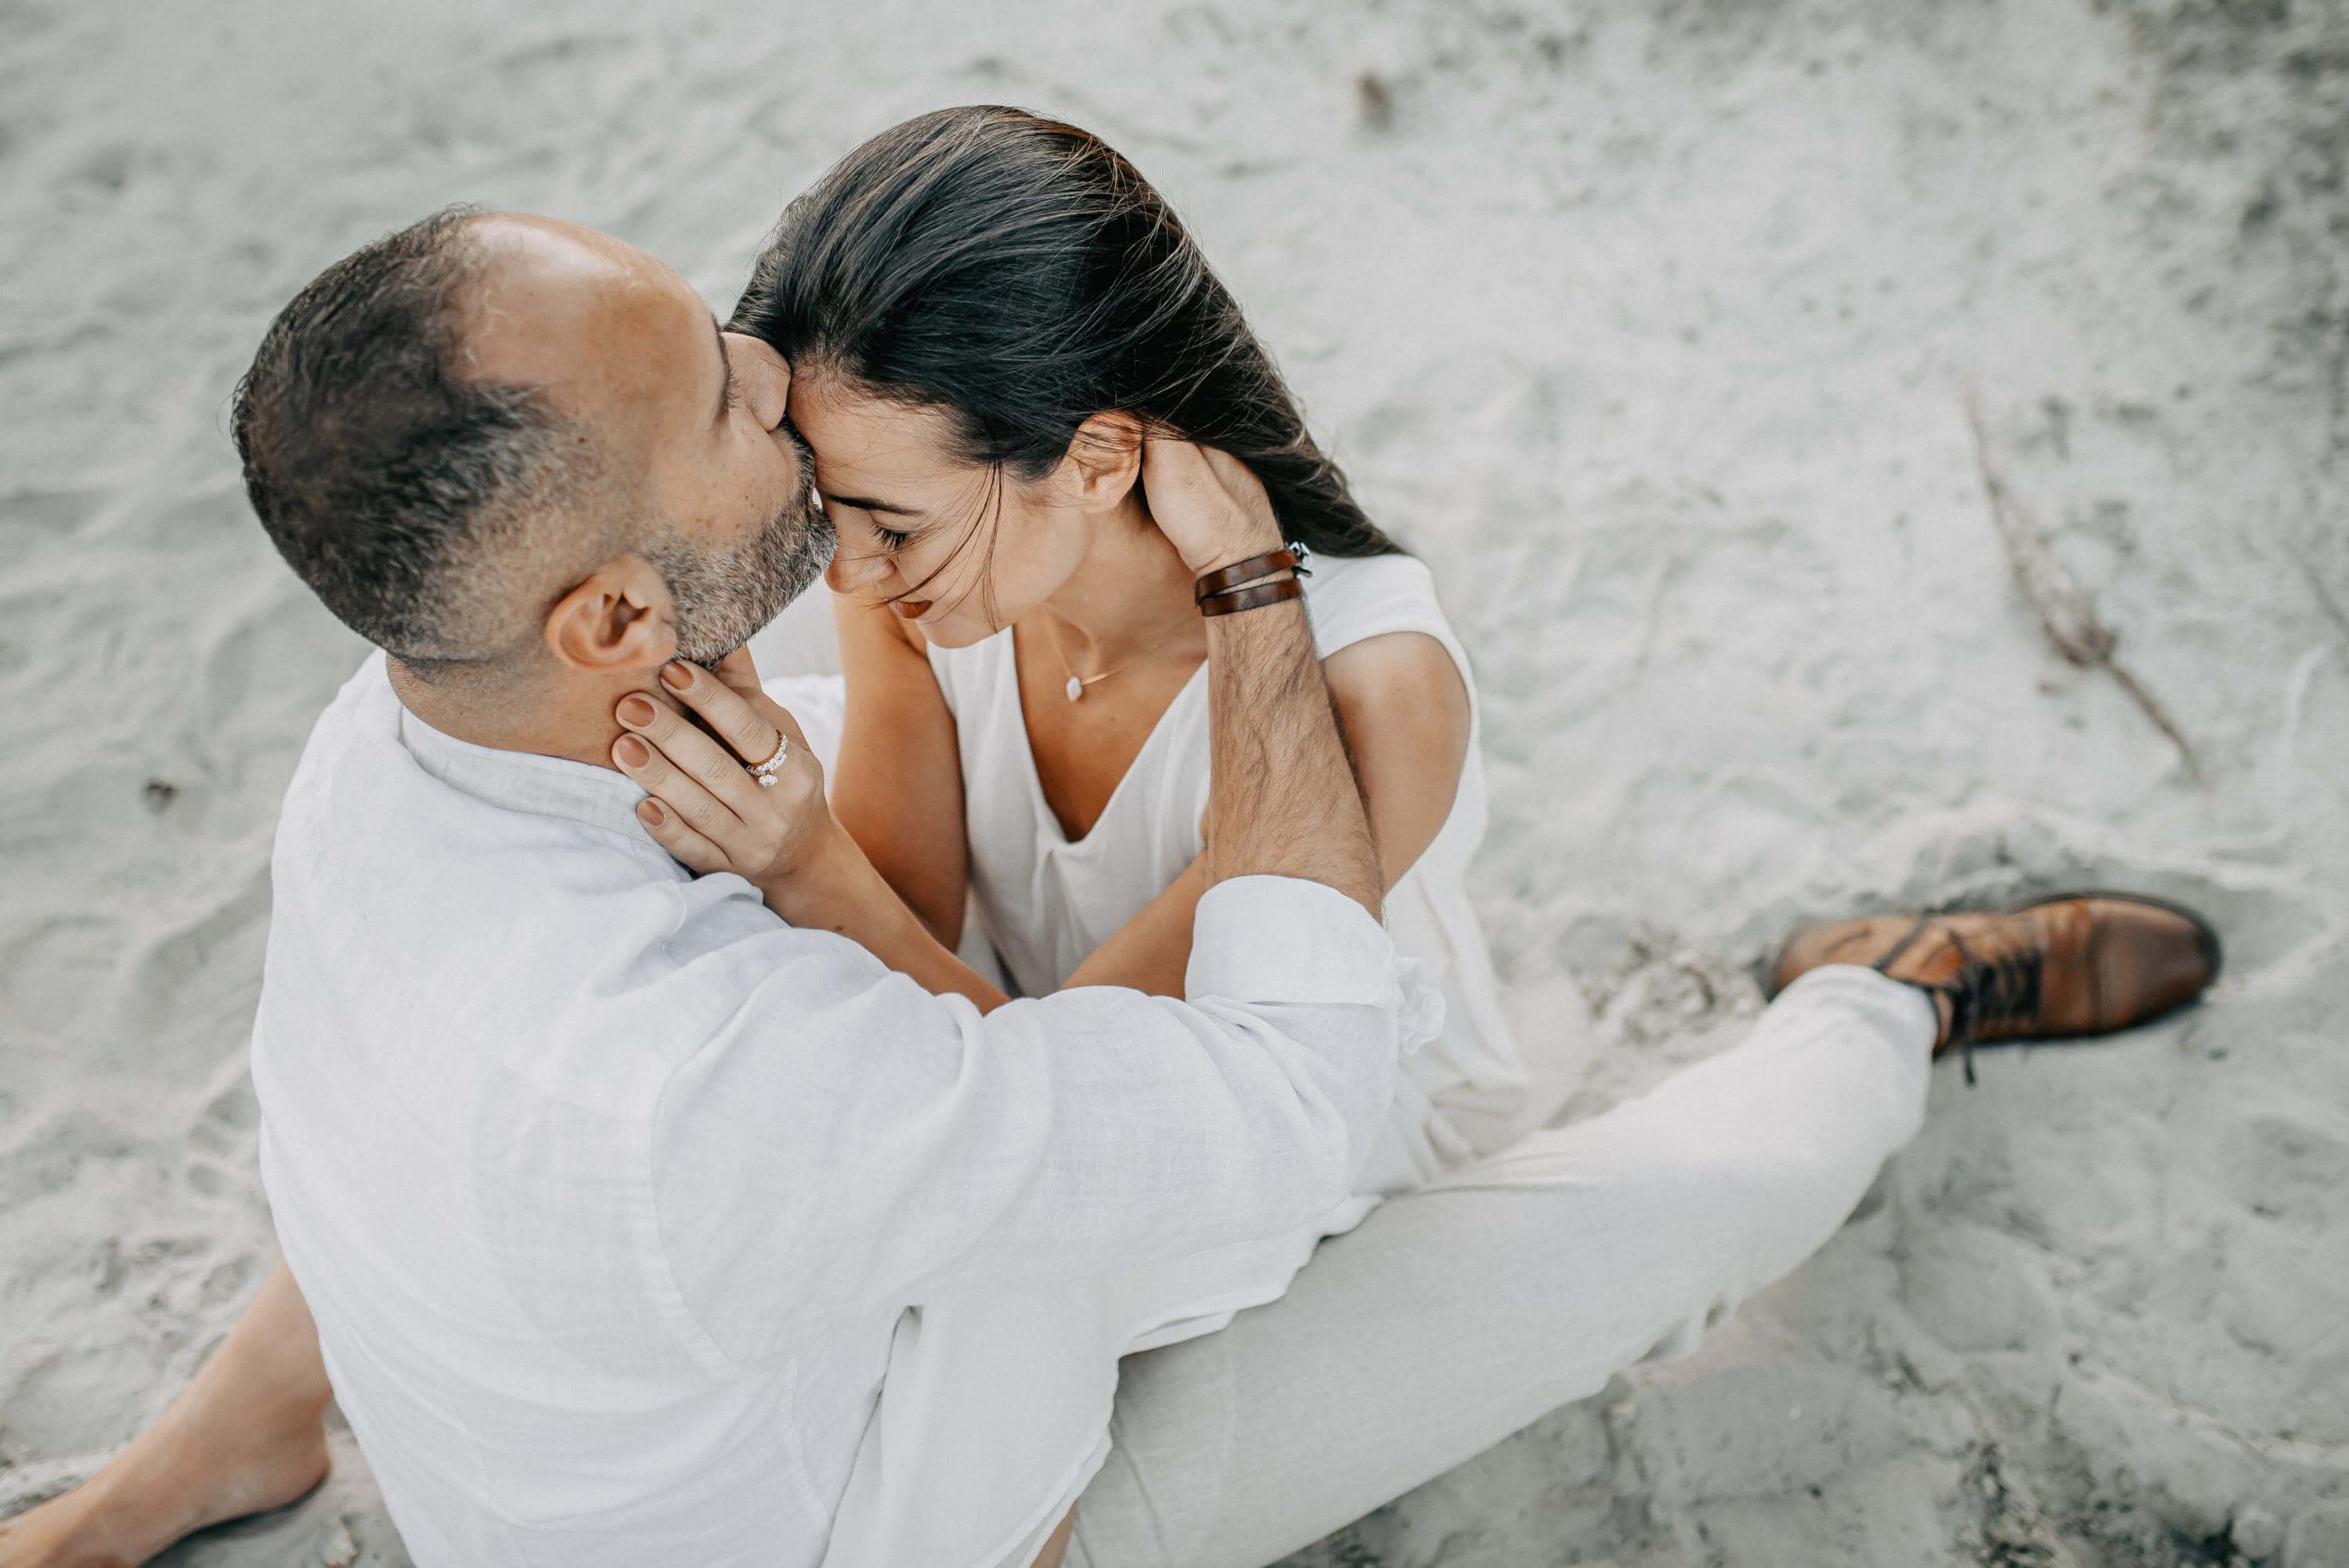 Sitting in a tight embrace on the sand of the heathland, a man kisses his wife on the forehead while he holds her head in both hands and she closes her eyes.